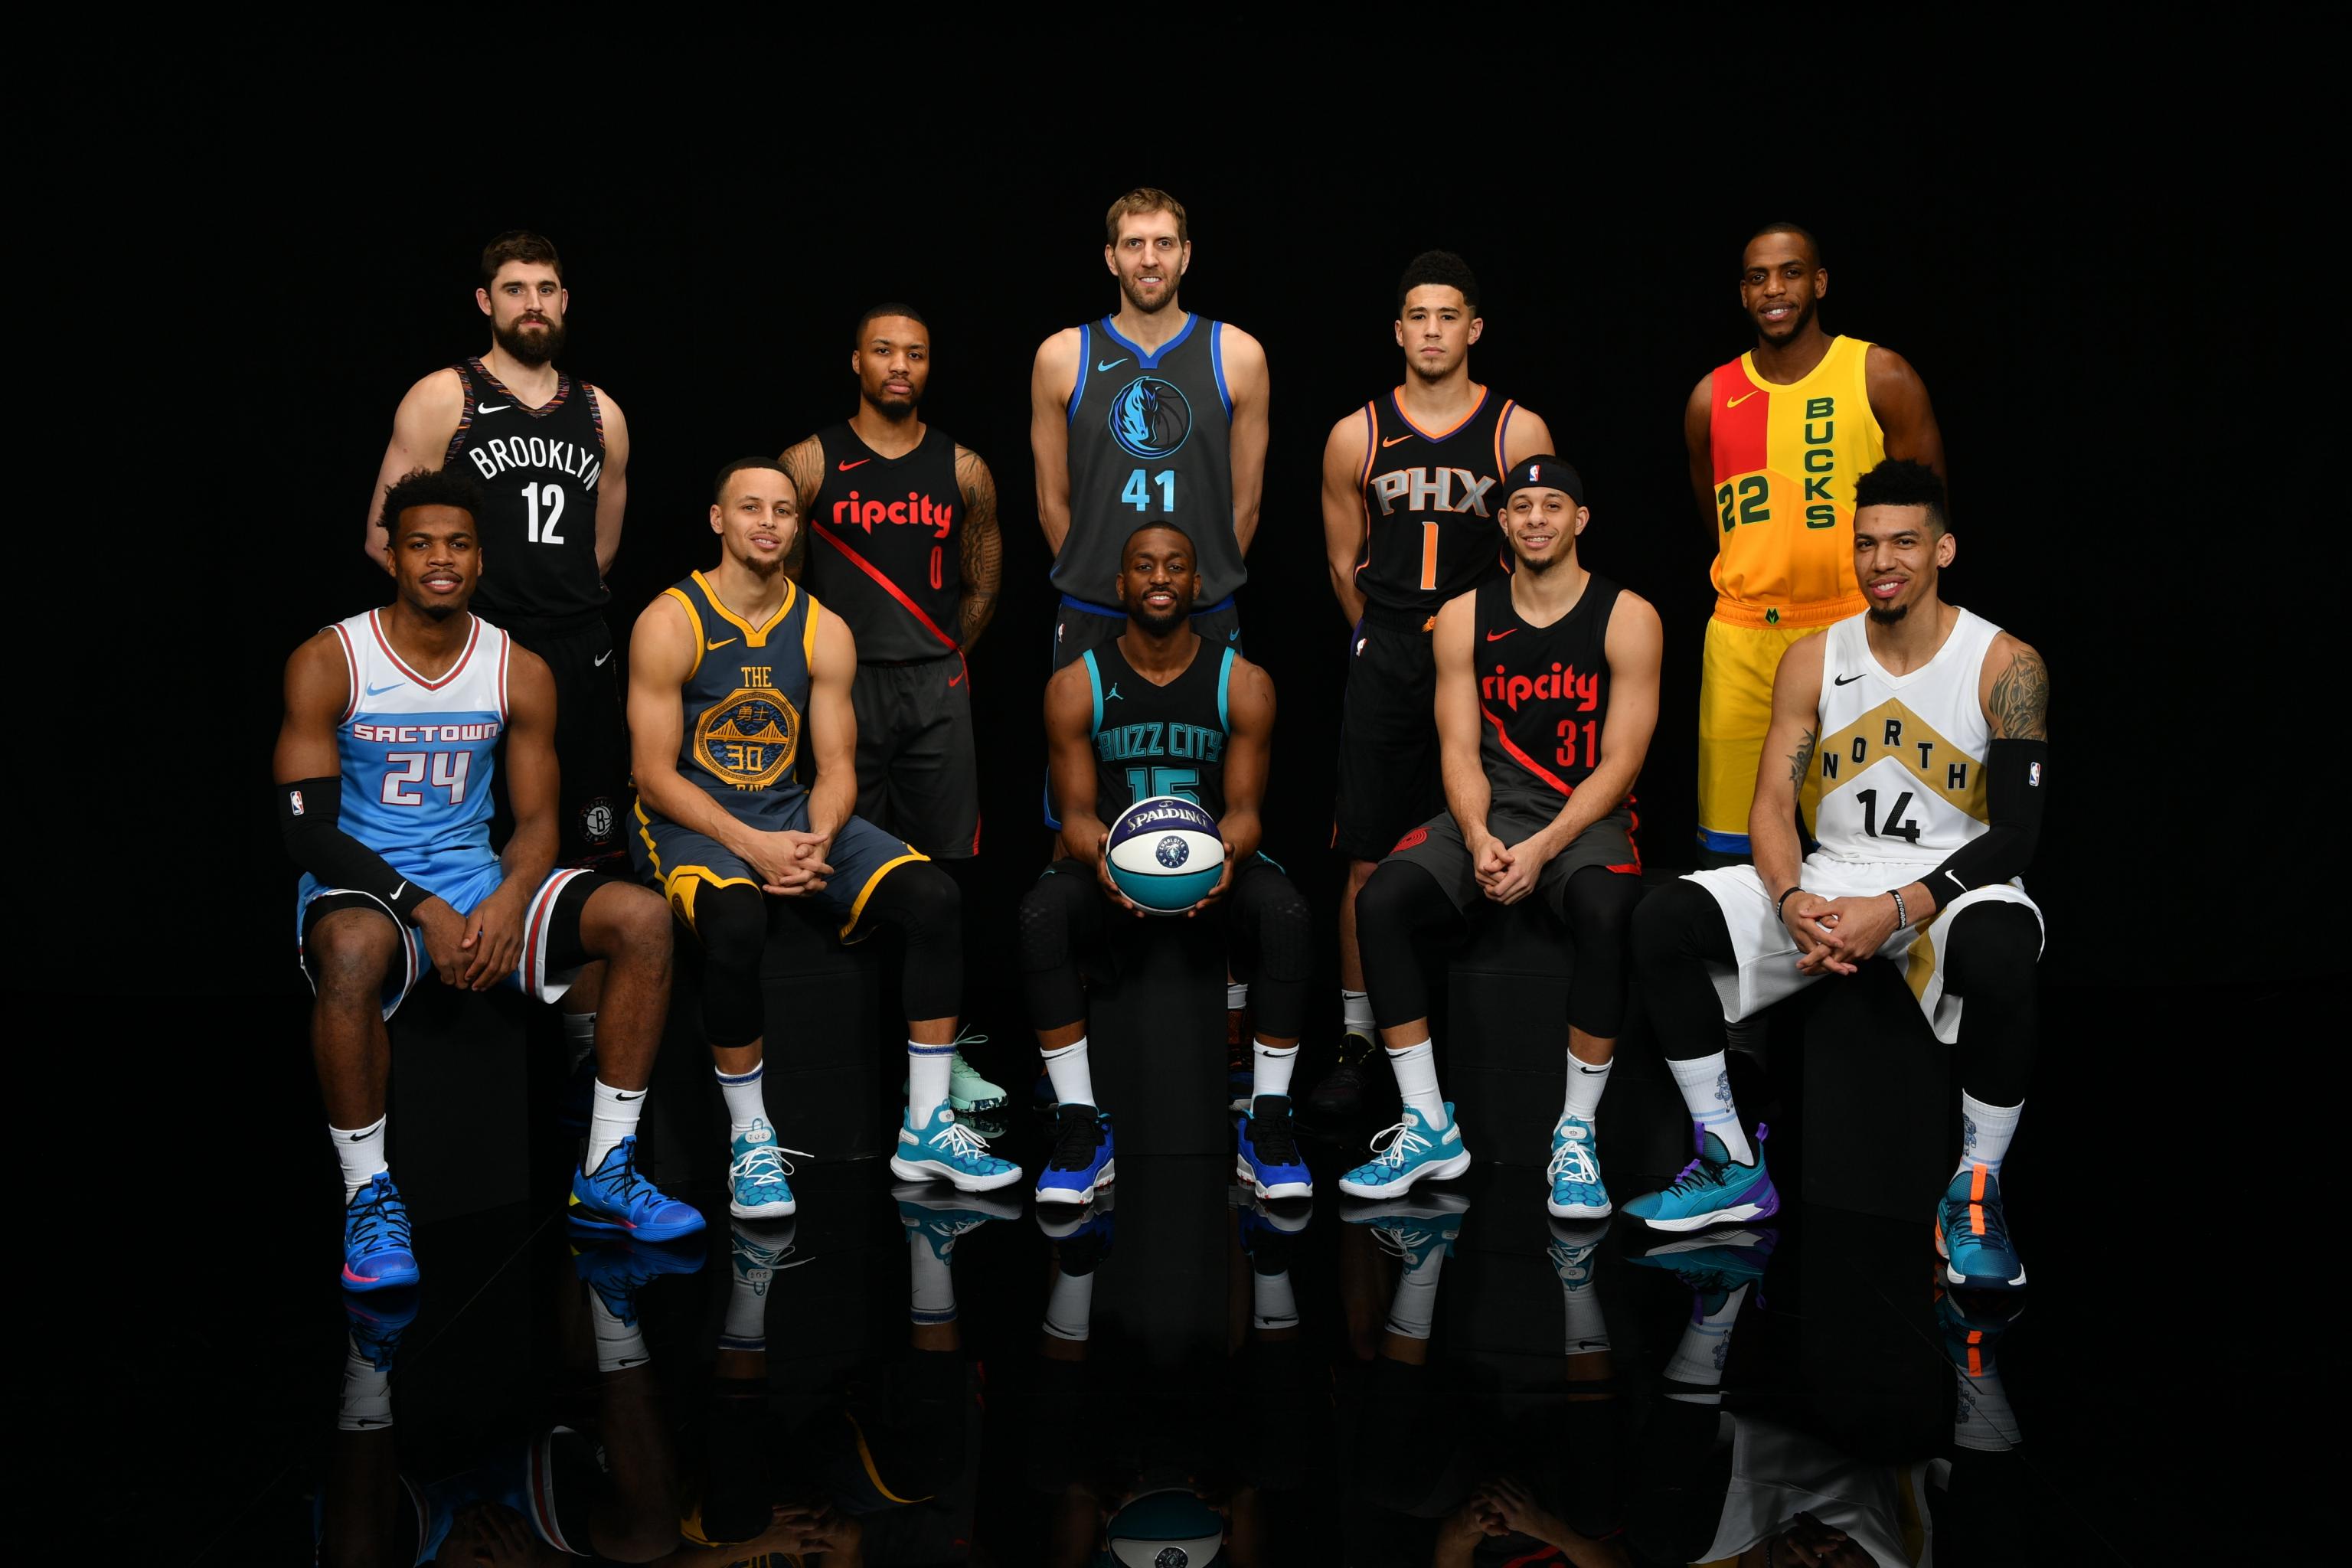 Nba All Star Game Uniforms 2019 Pictures And Breakdown Of This Year S Threads Bleacher Report Latest News Videos And Highlights